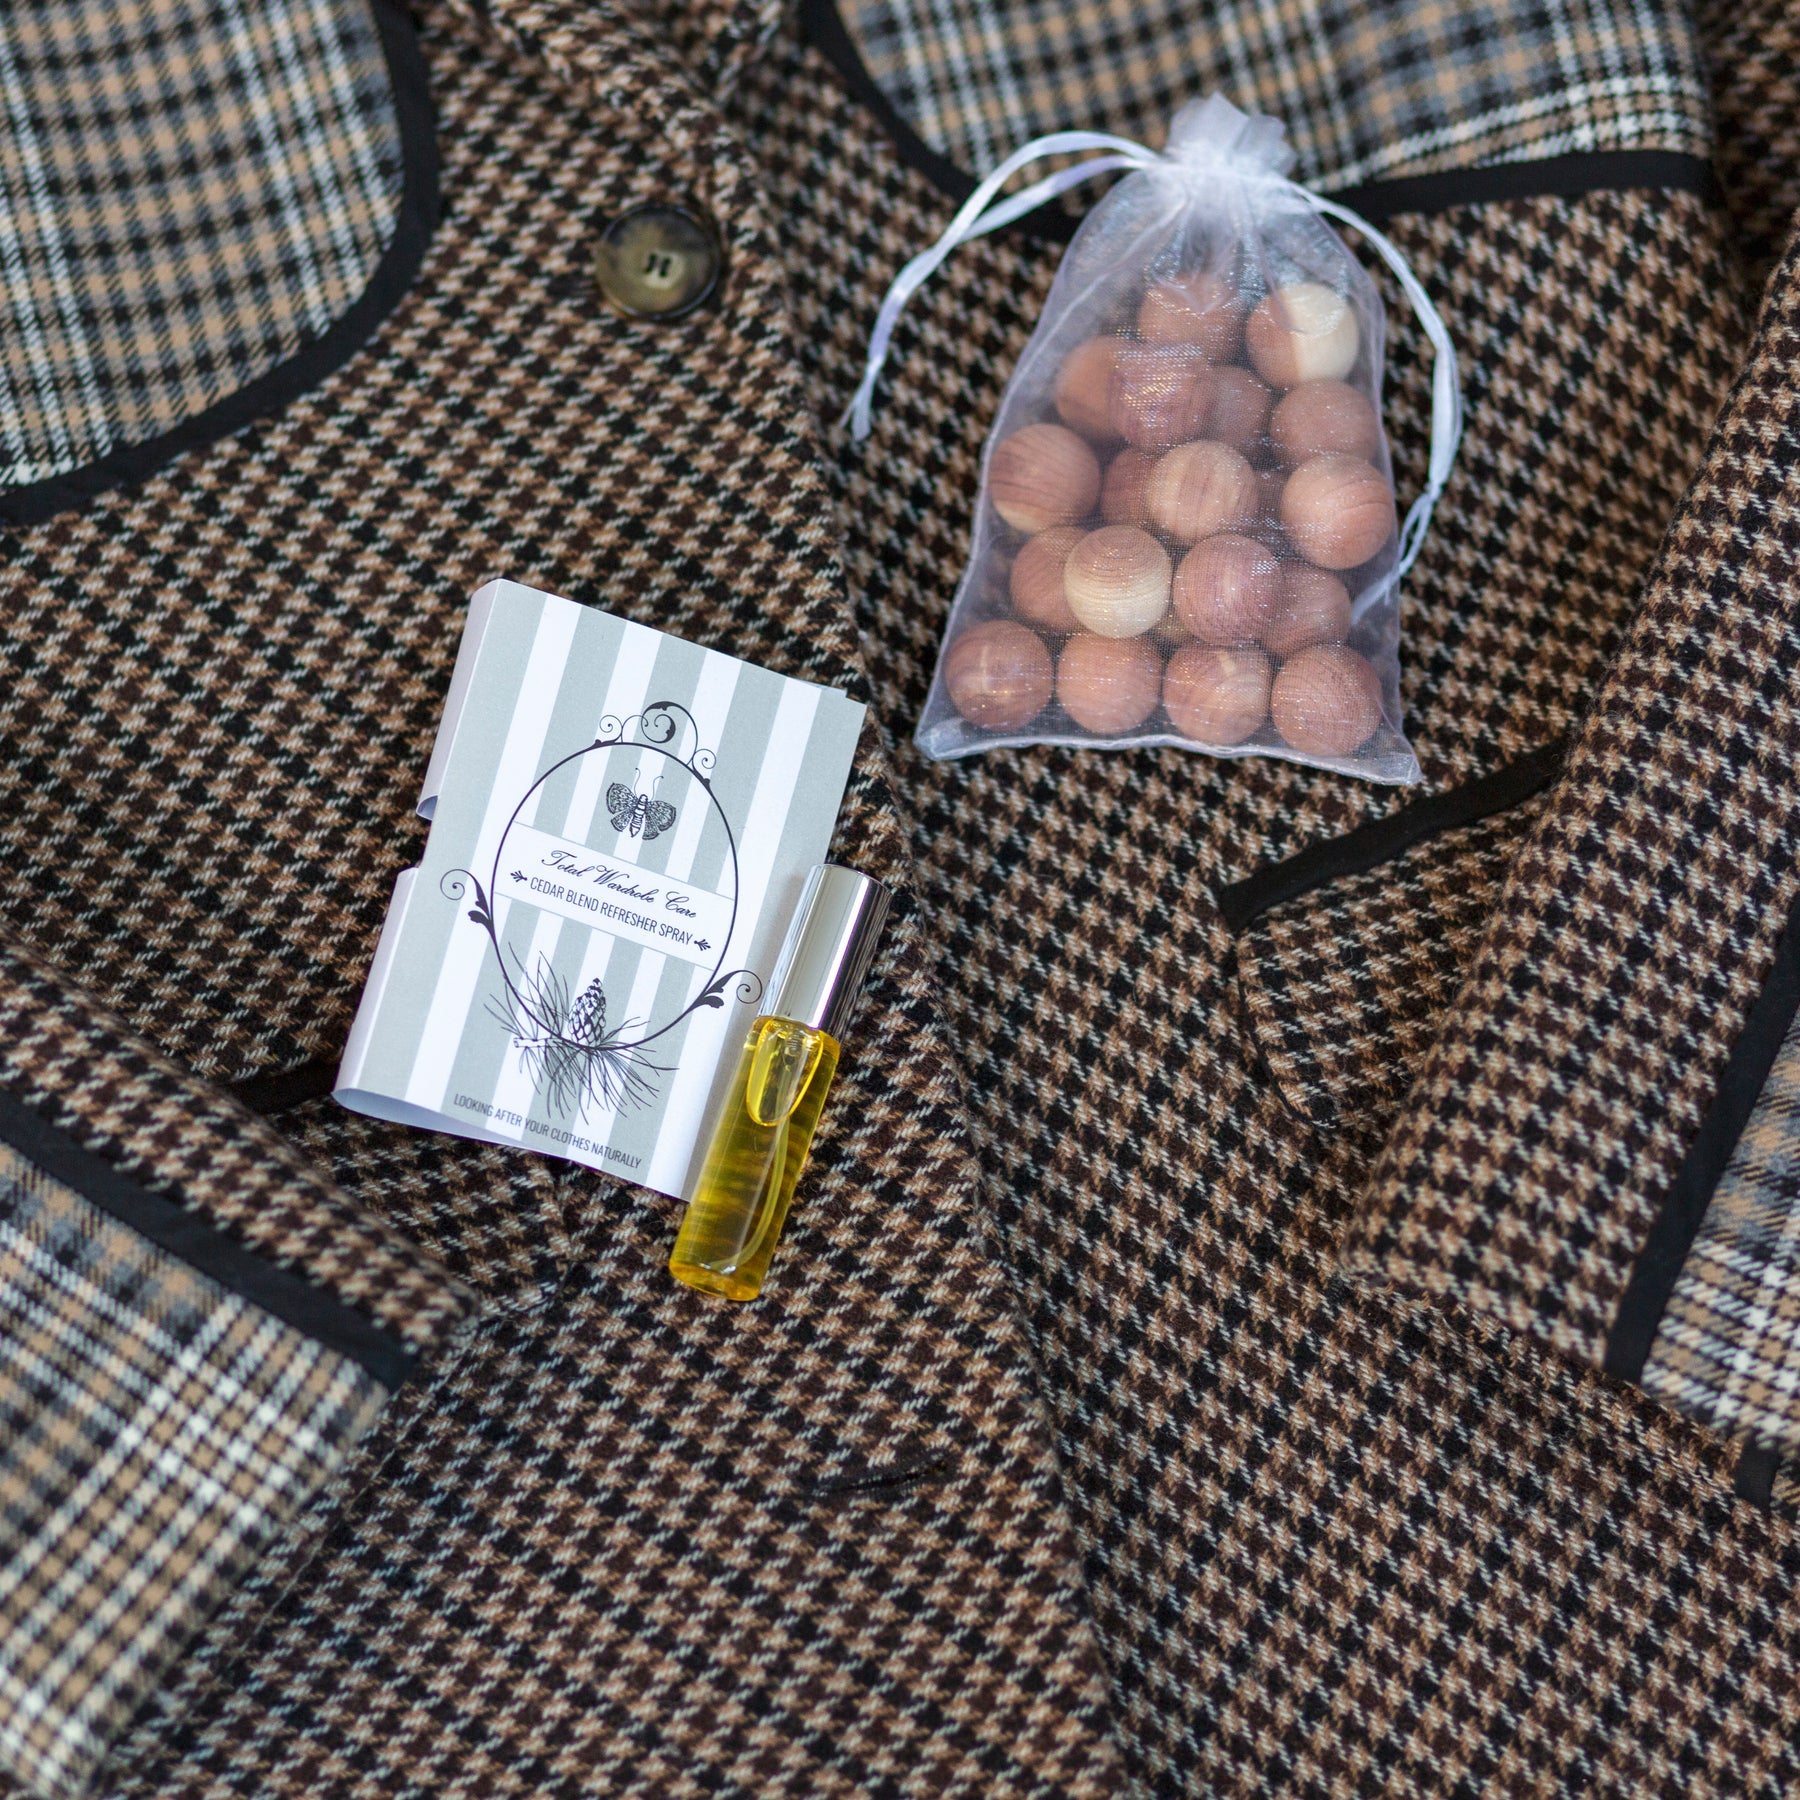 Closed organza bag filled with cedarwood balls beside refresher spray on top of tweed jacket